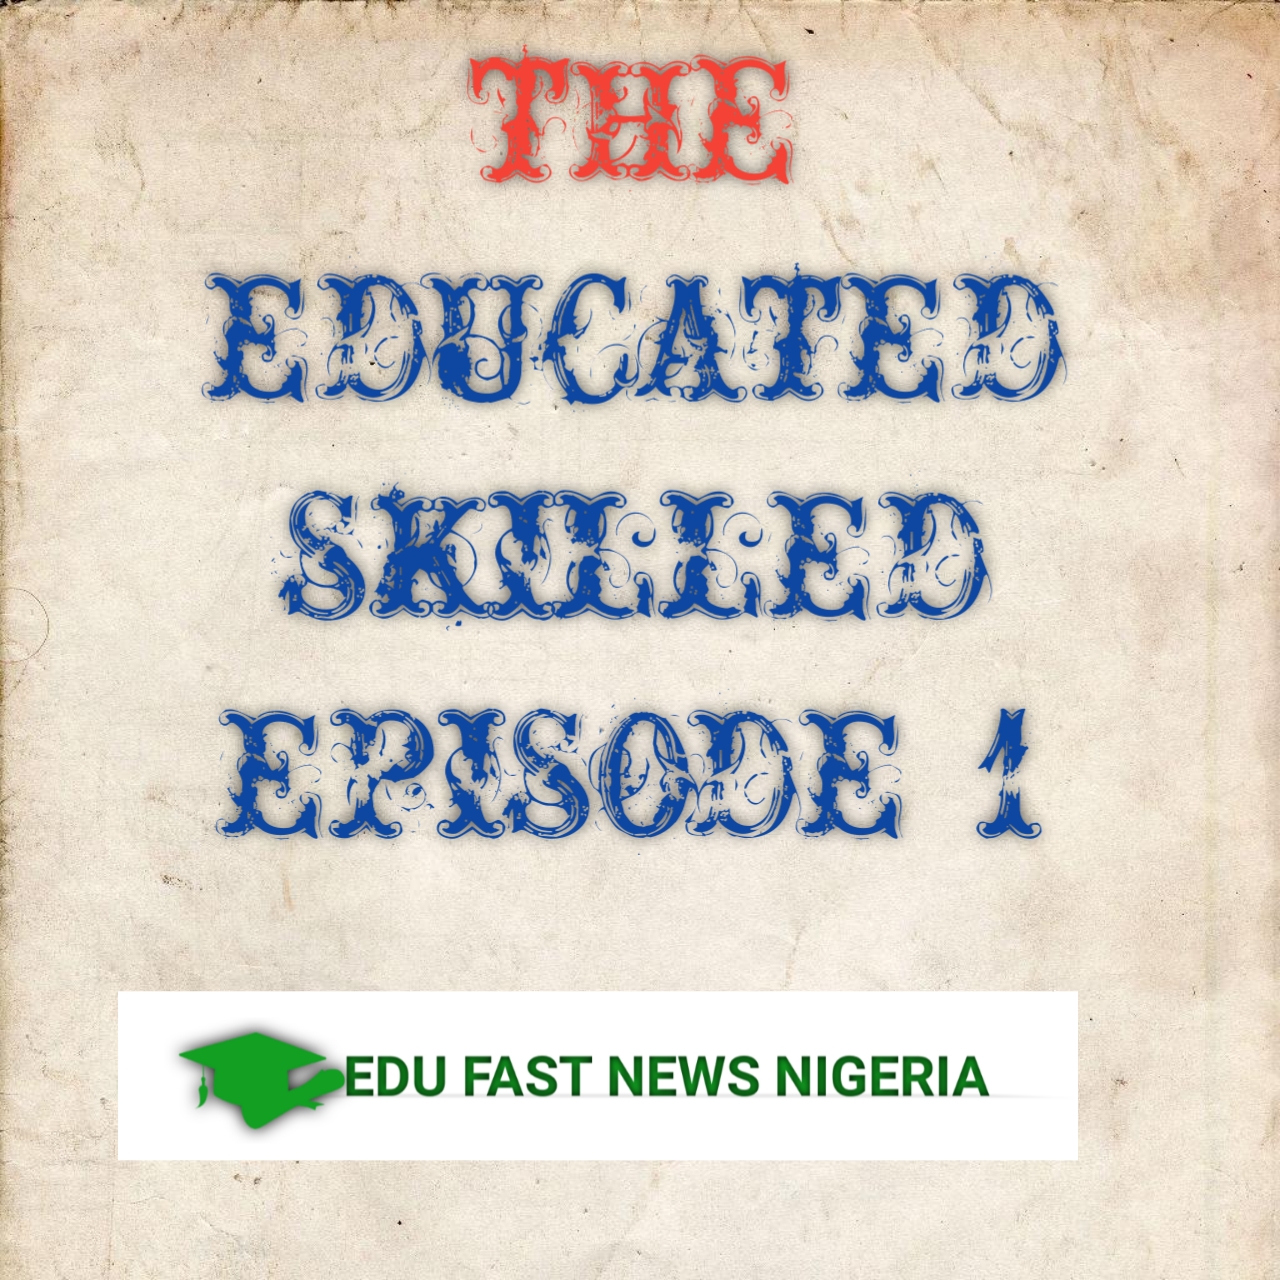 The Educated Skilled Episode 1